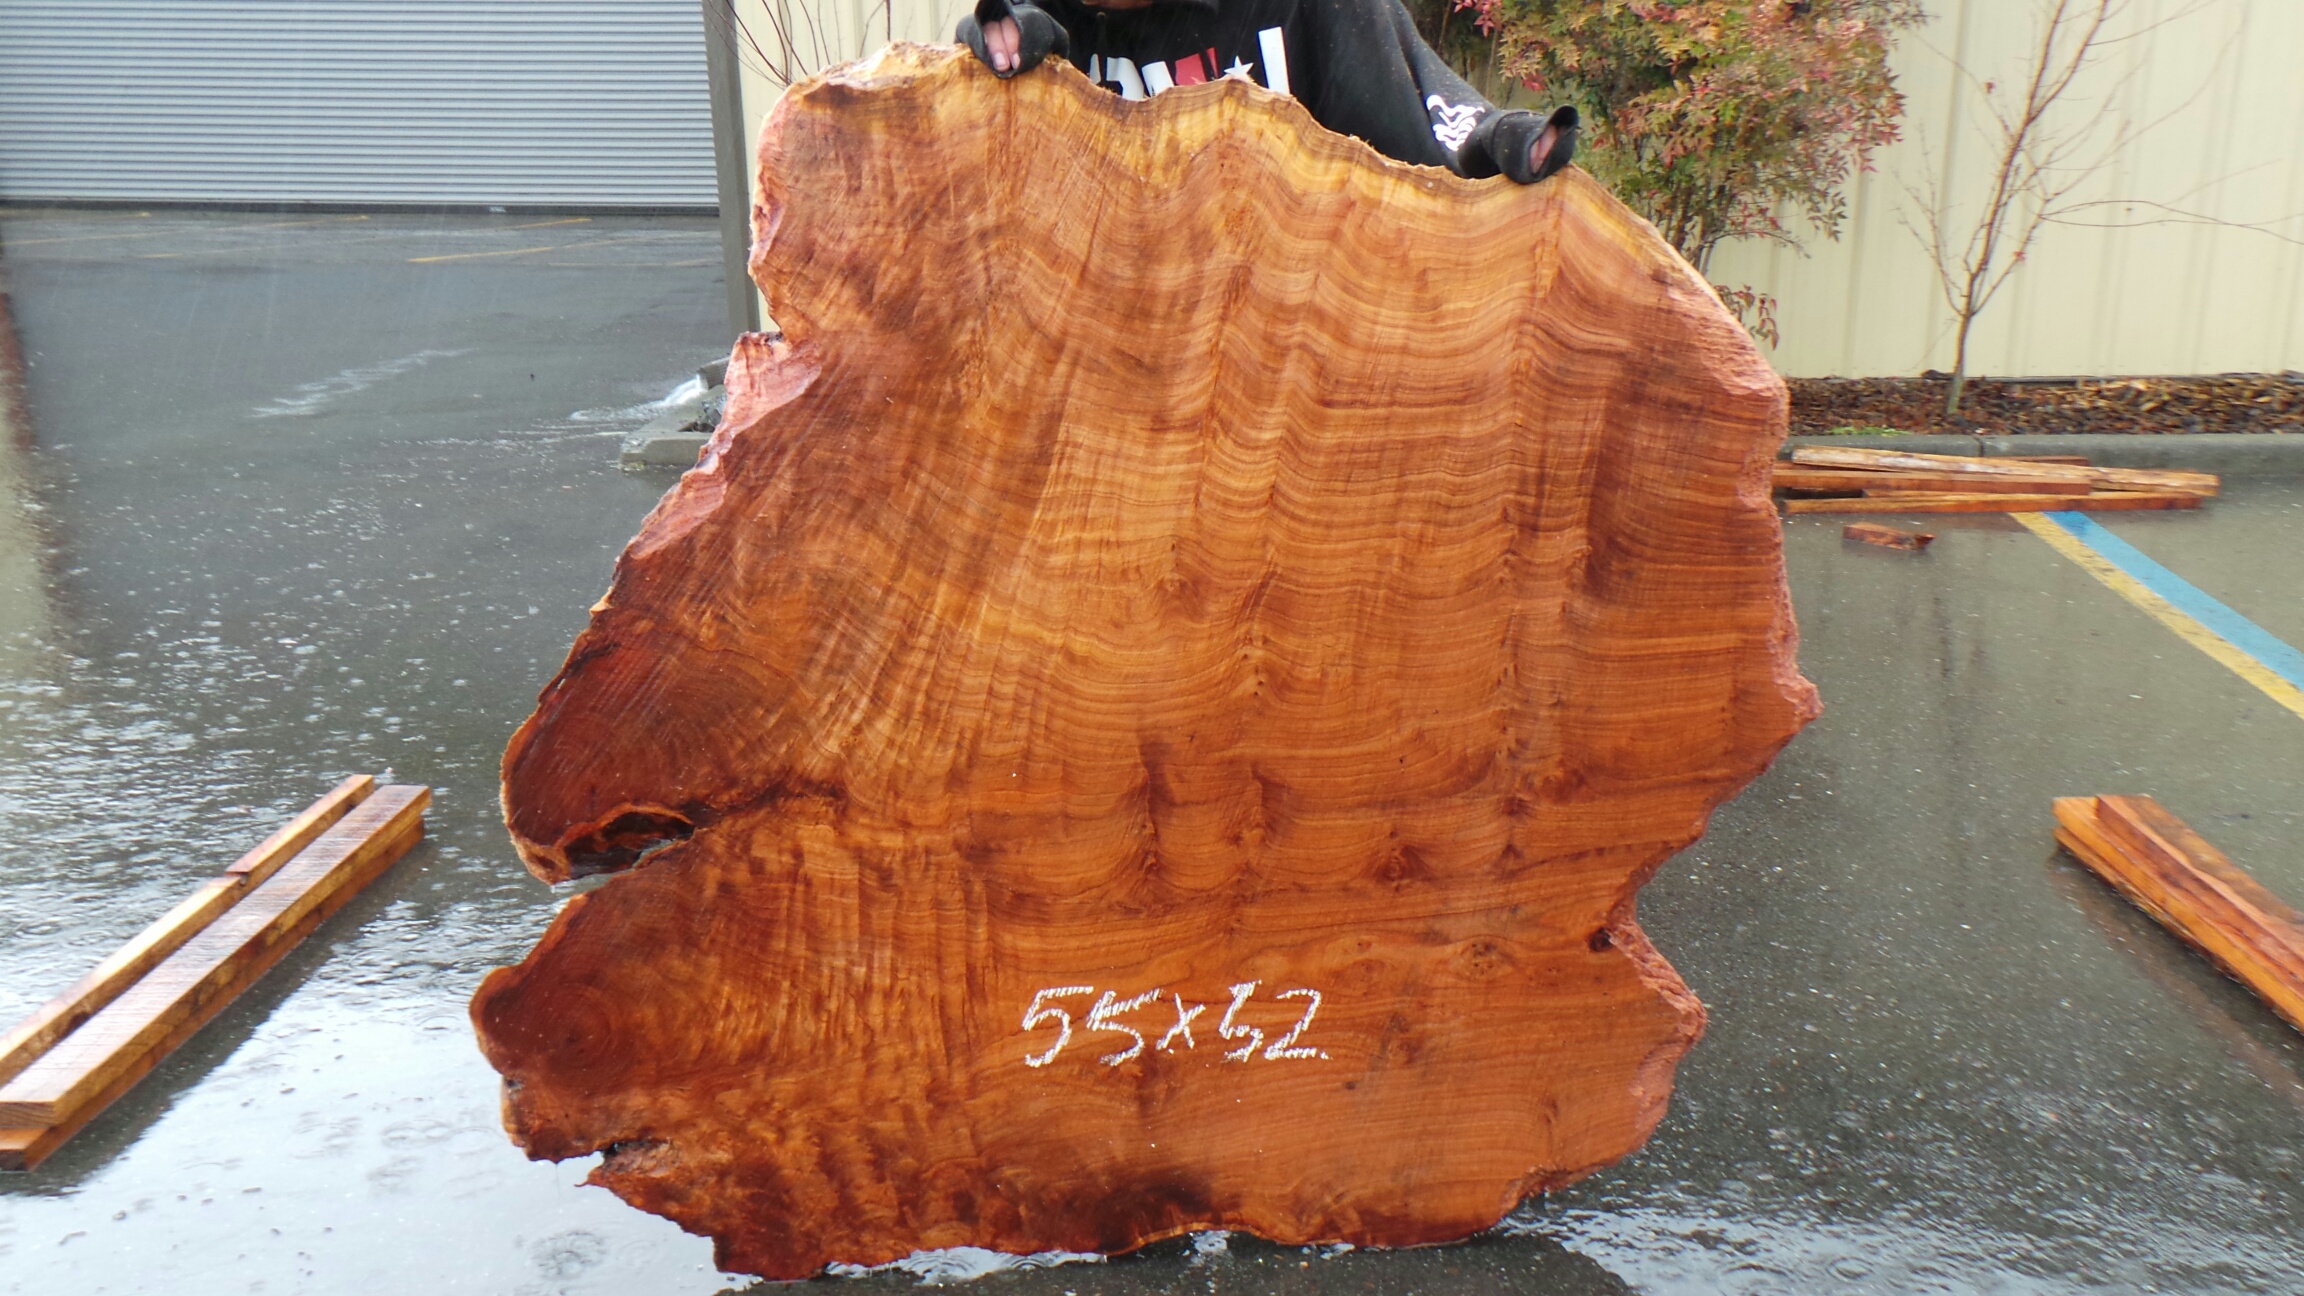 Highly Figured Redwood Slab - Curly Wood Grain and Natural Stripes